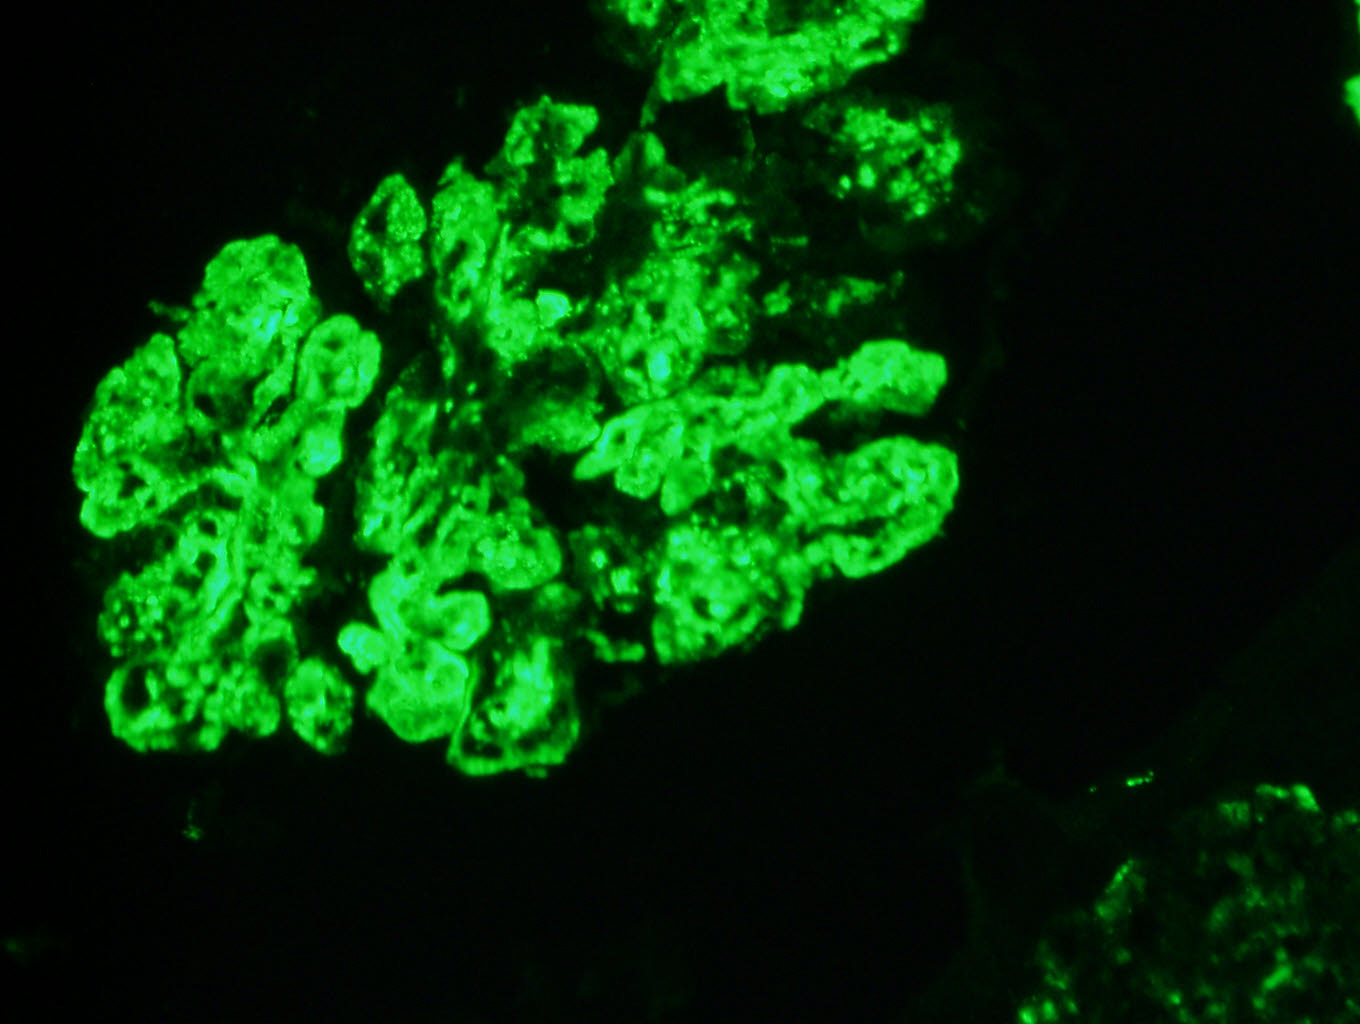 C3 staining in C3 glomerulopathy (C3 GN variant)